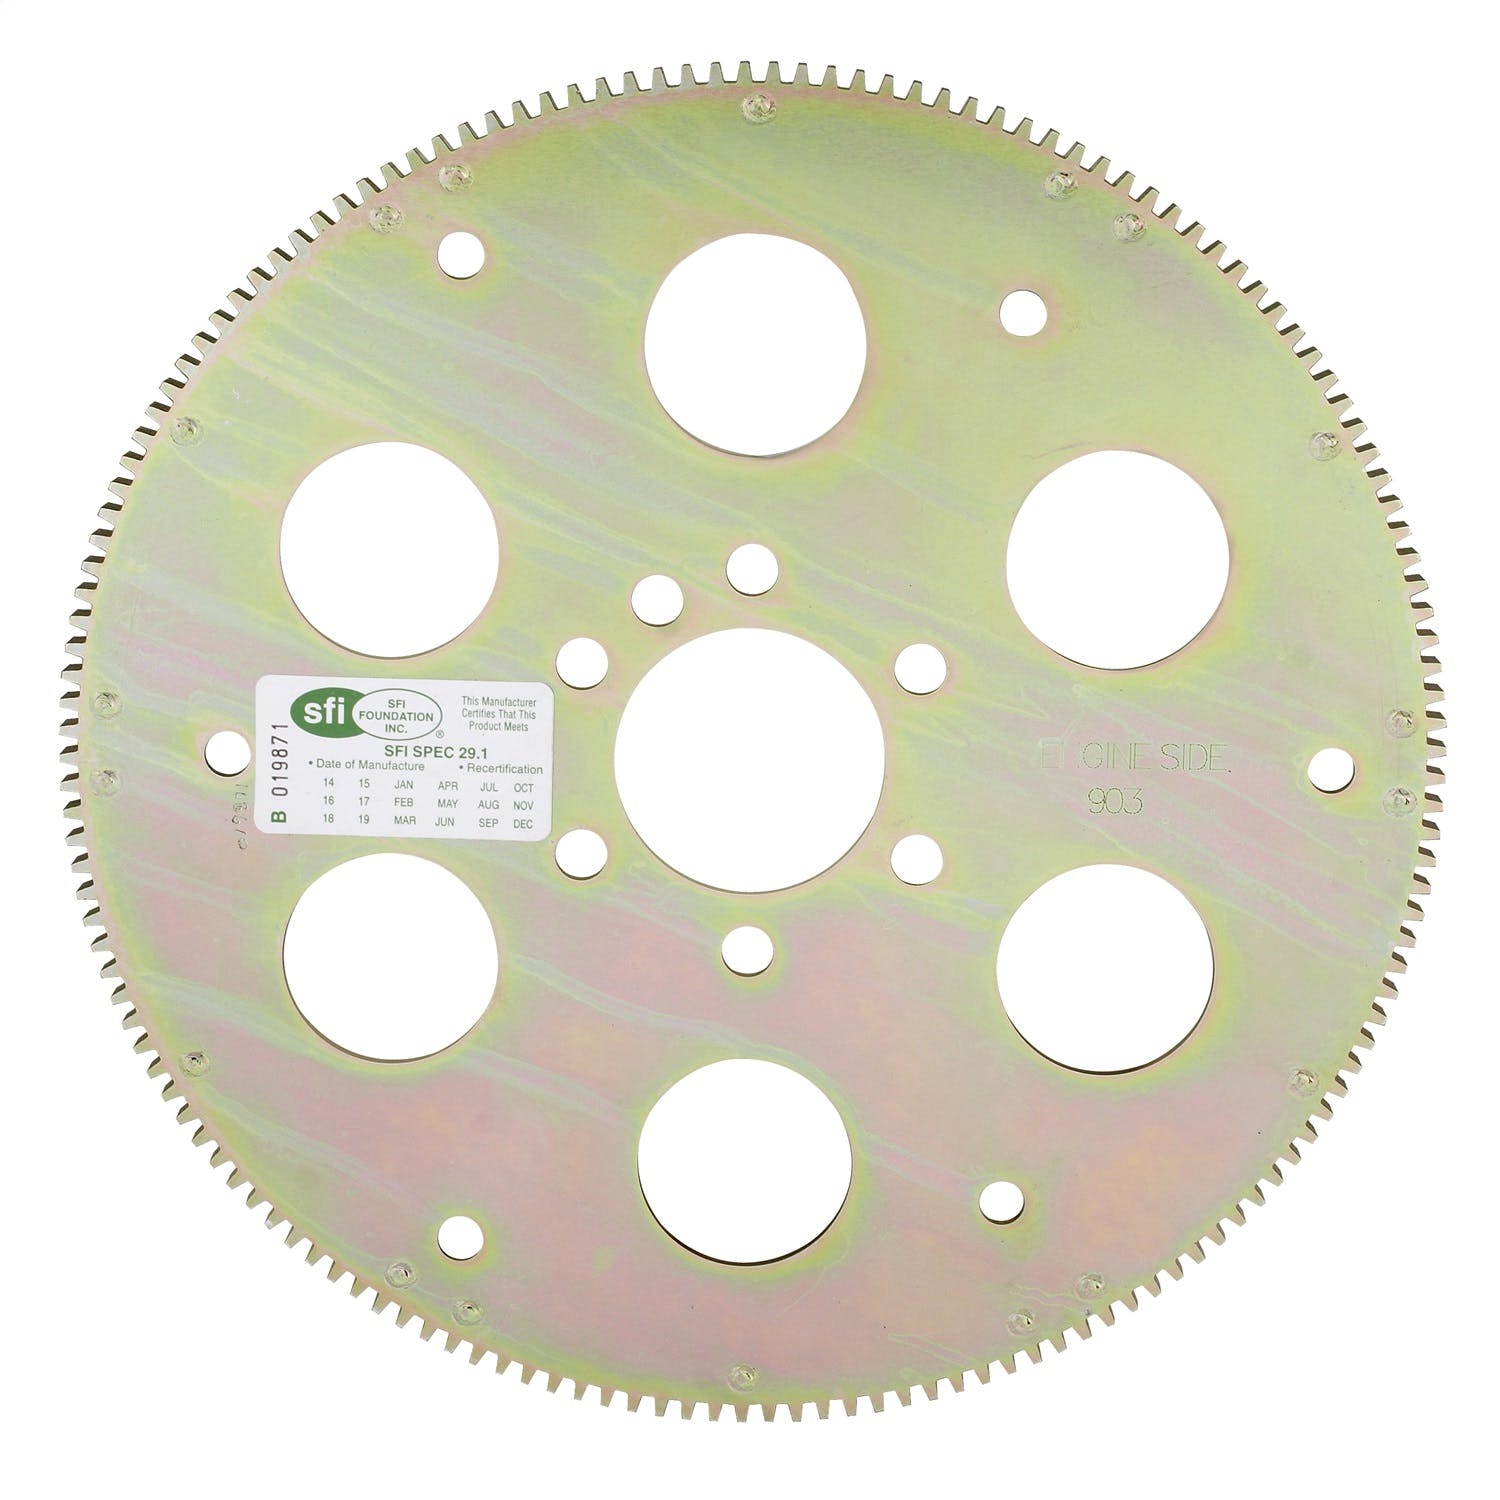 QuickTime RM-803 FLEXPLATE,153 TOOTH GM